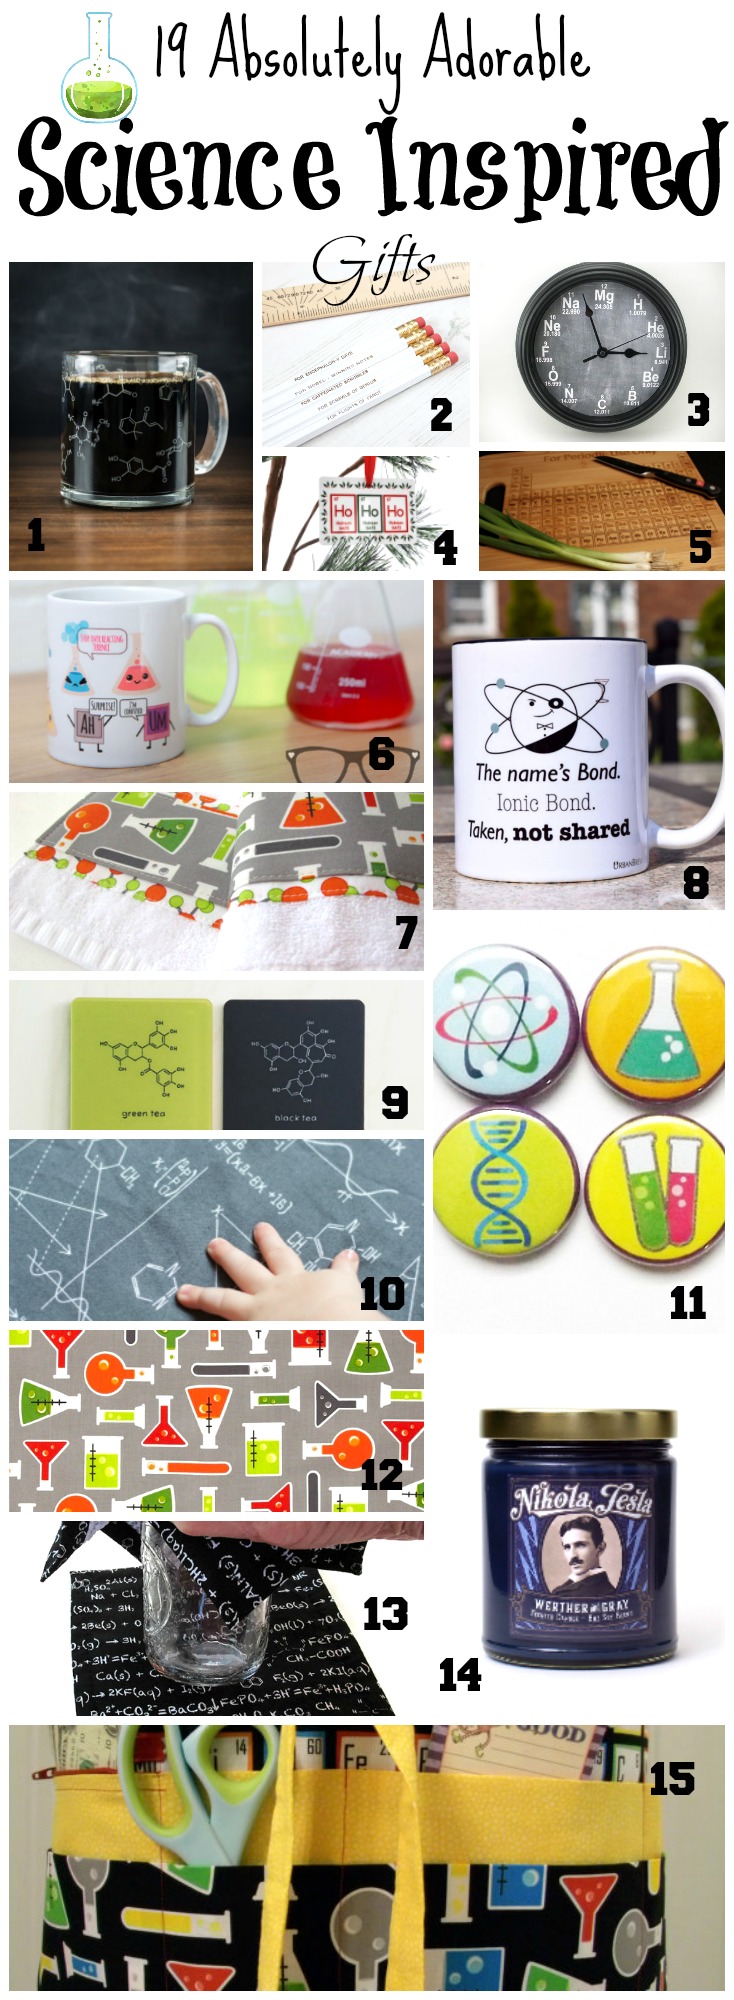 19 Absolutely Adorable Science Inspired Gifts for the Scientist or